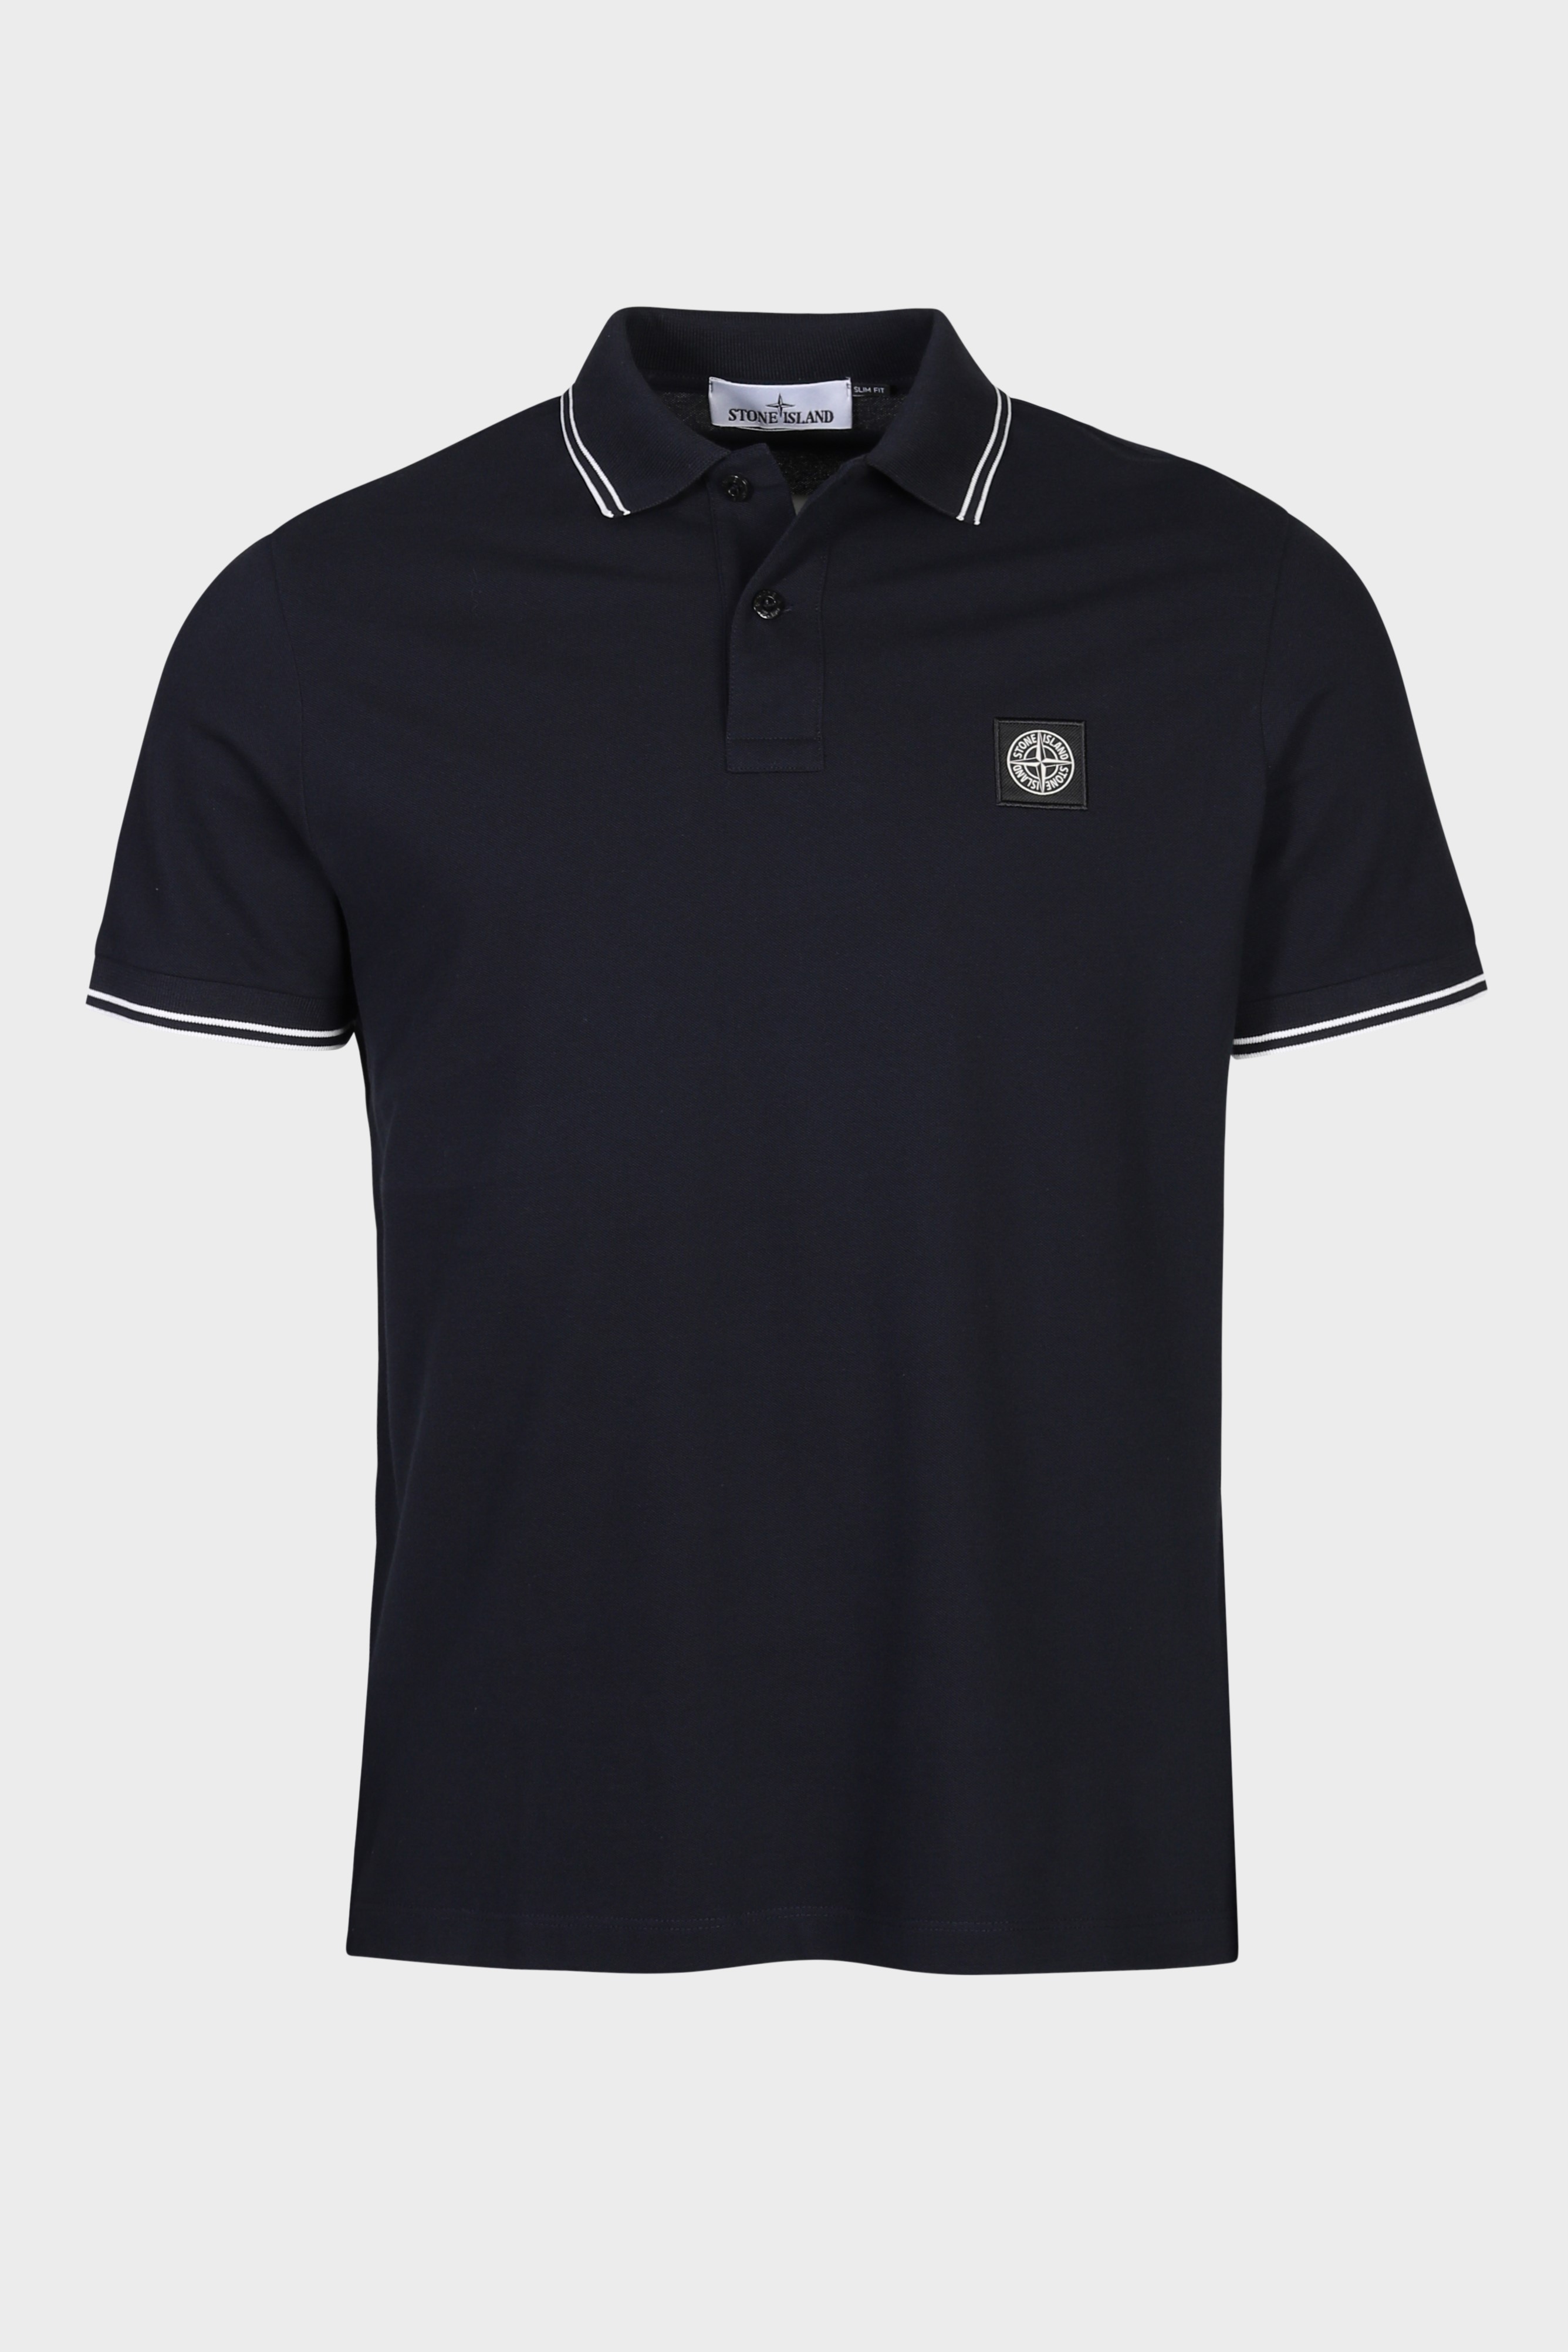 STONE ISLAND Slim Fit Polo Shirt in Navy M